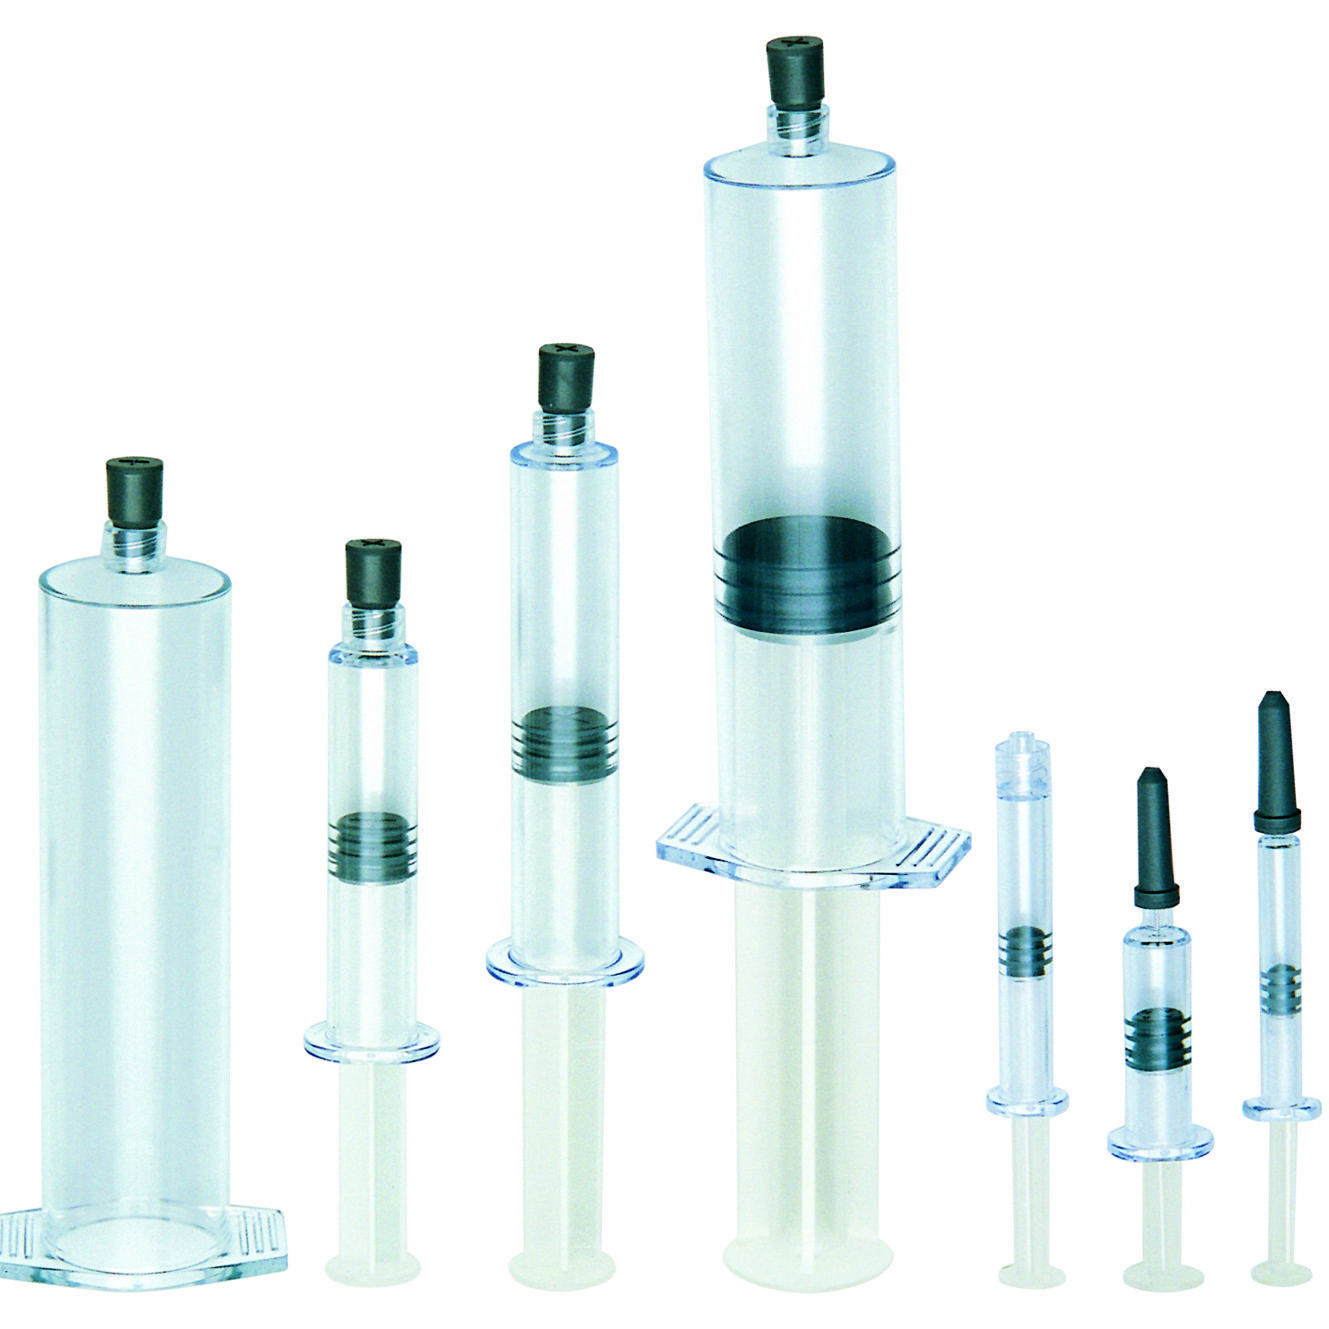 Range of polymer syringes of different sizes	